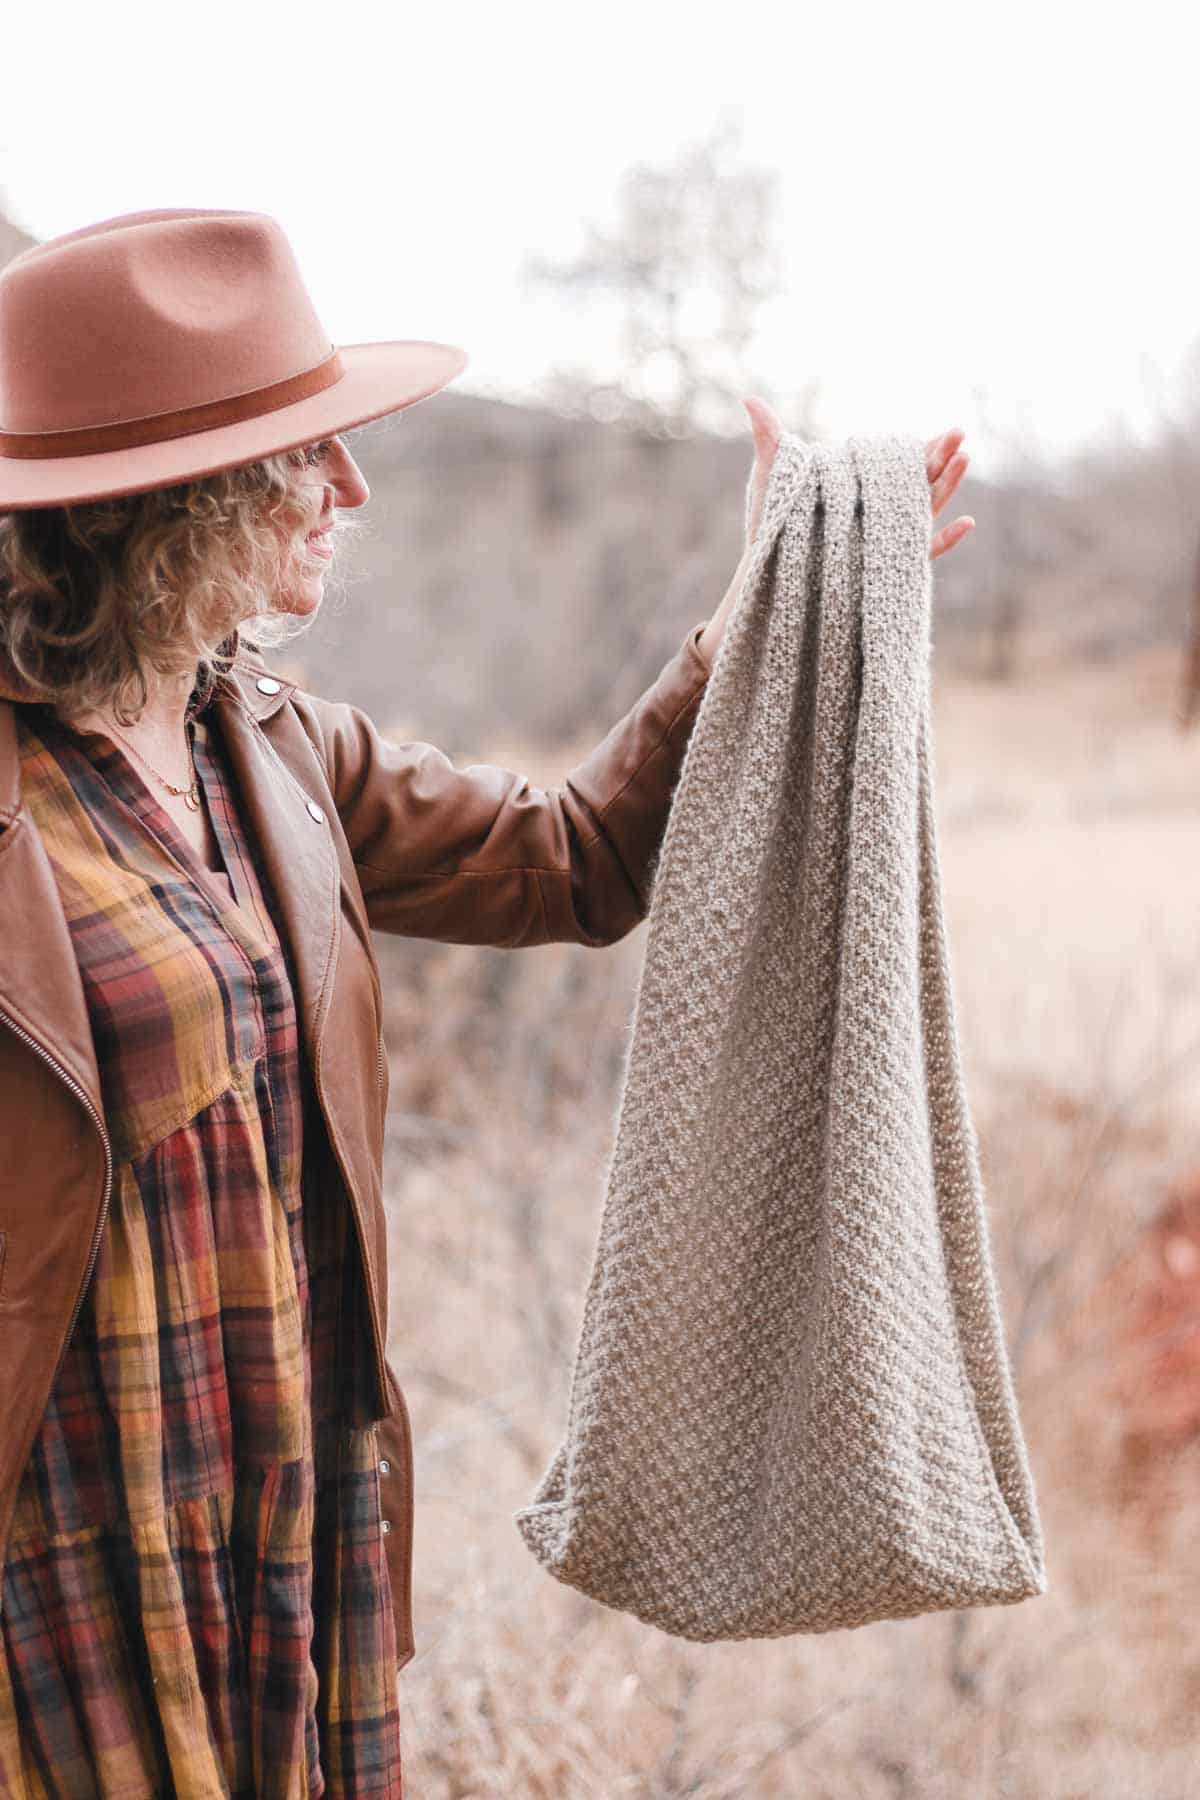 Simple knit eternity scarf draped over the hand of a woman in nature.